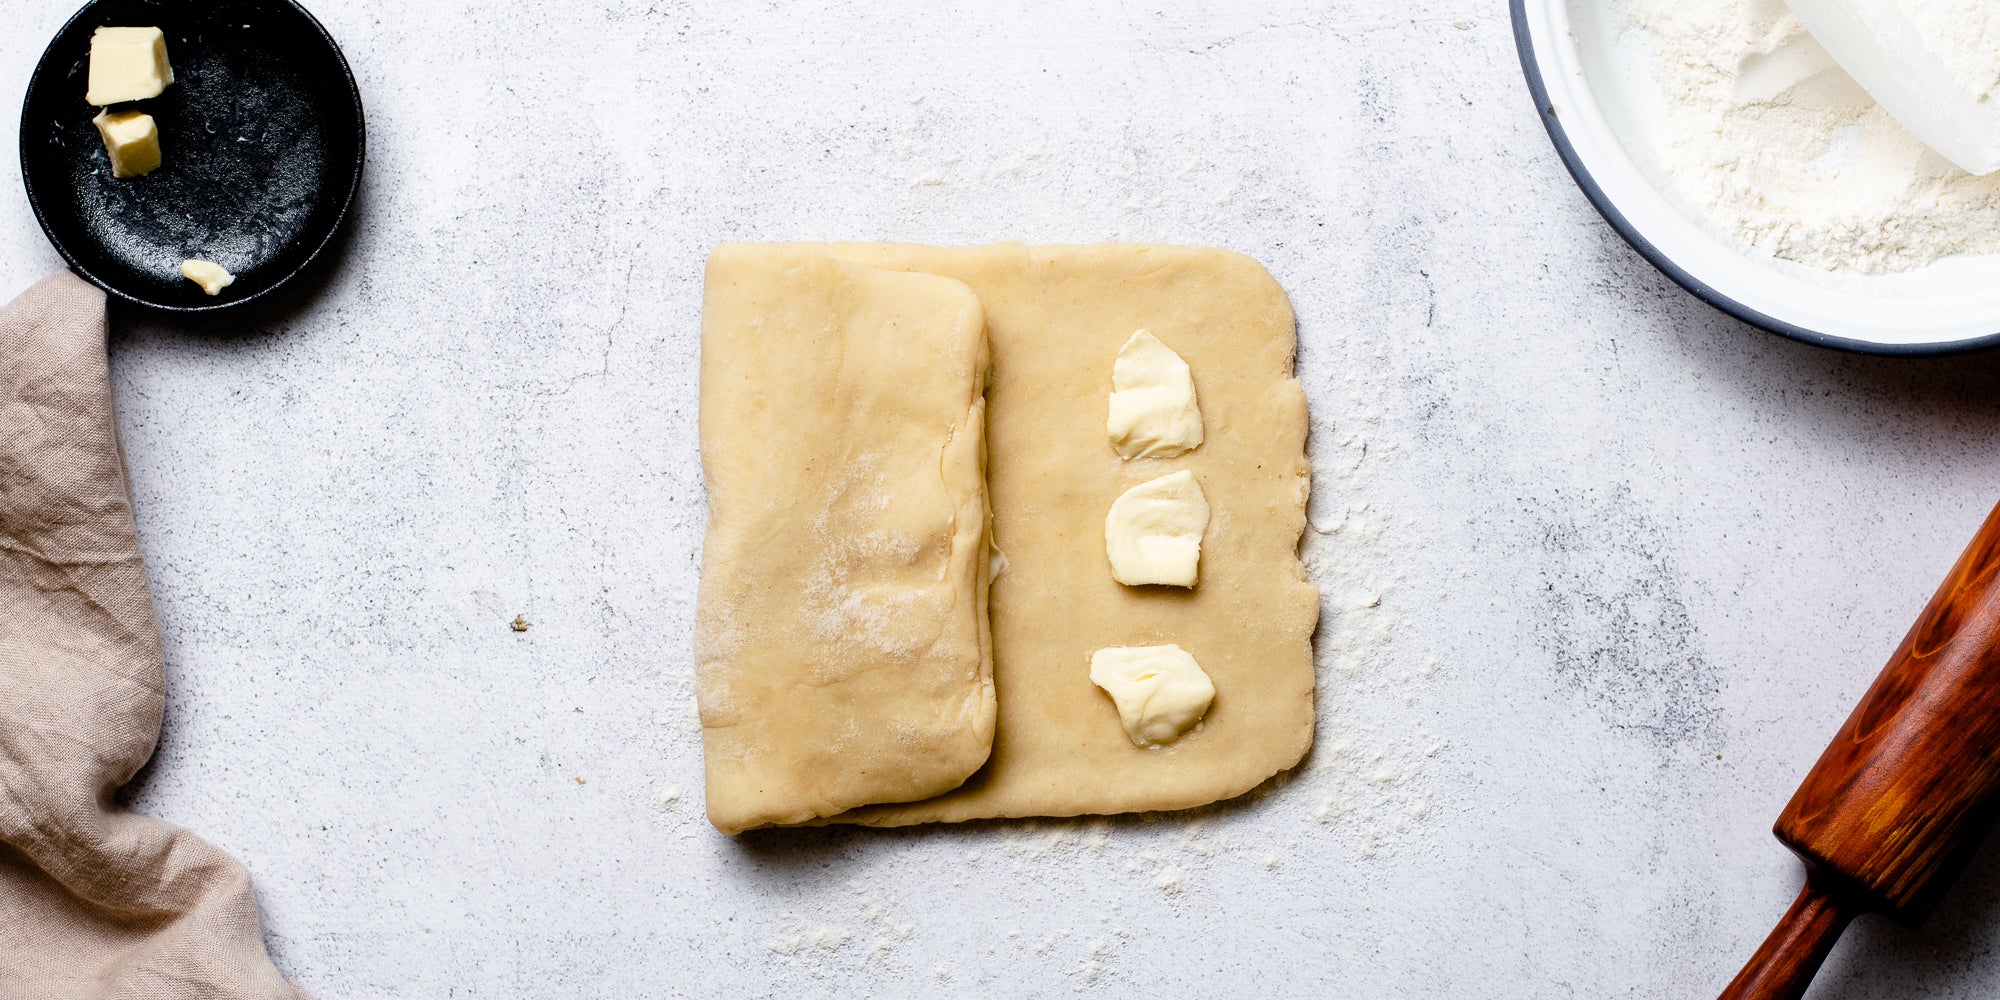 Puff Pastry rolled out with knobs of butter ready to fold into the dough. Next to a rolling pin, bowl of flour and dish of butter